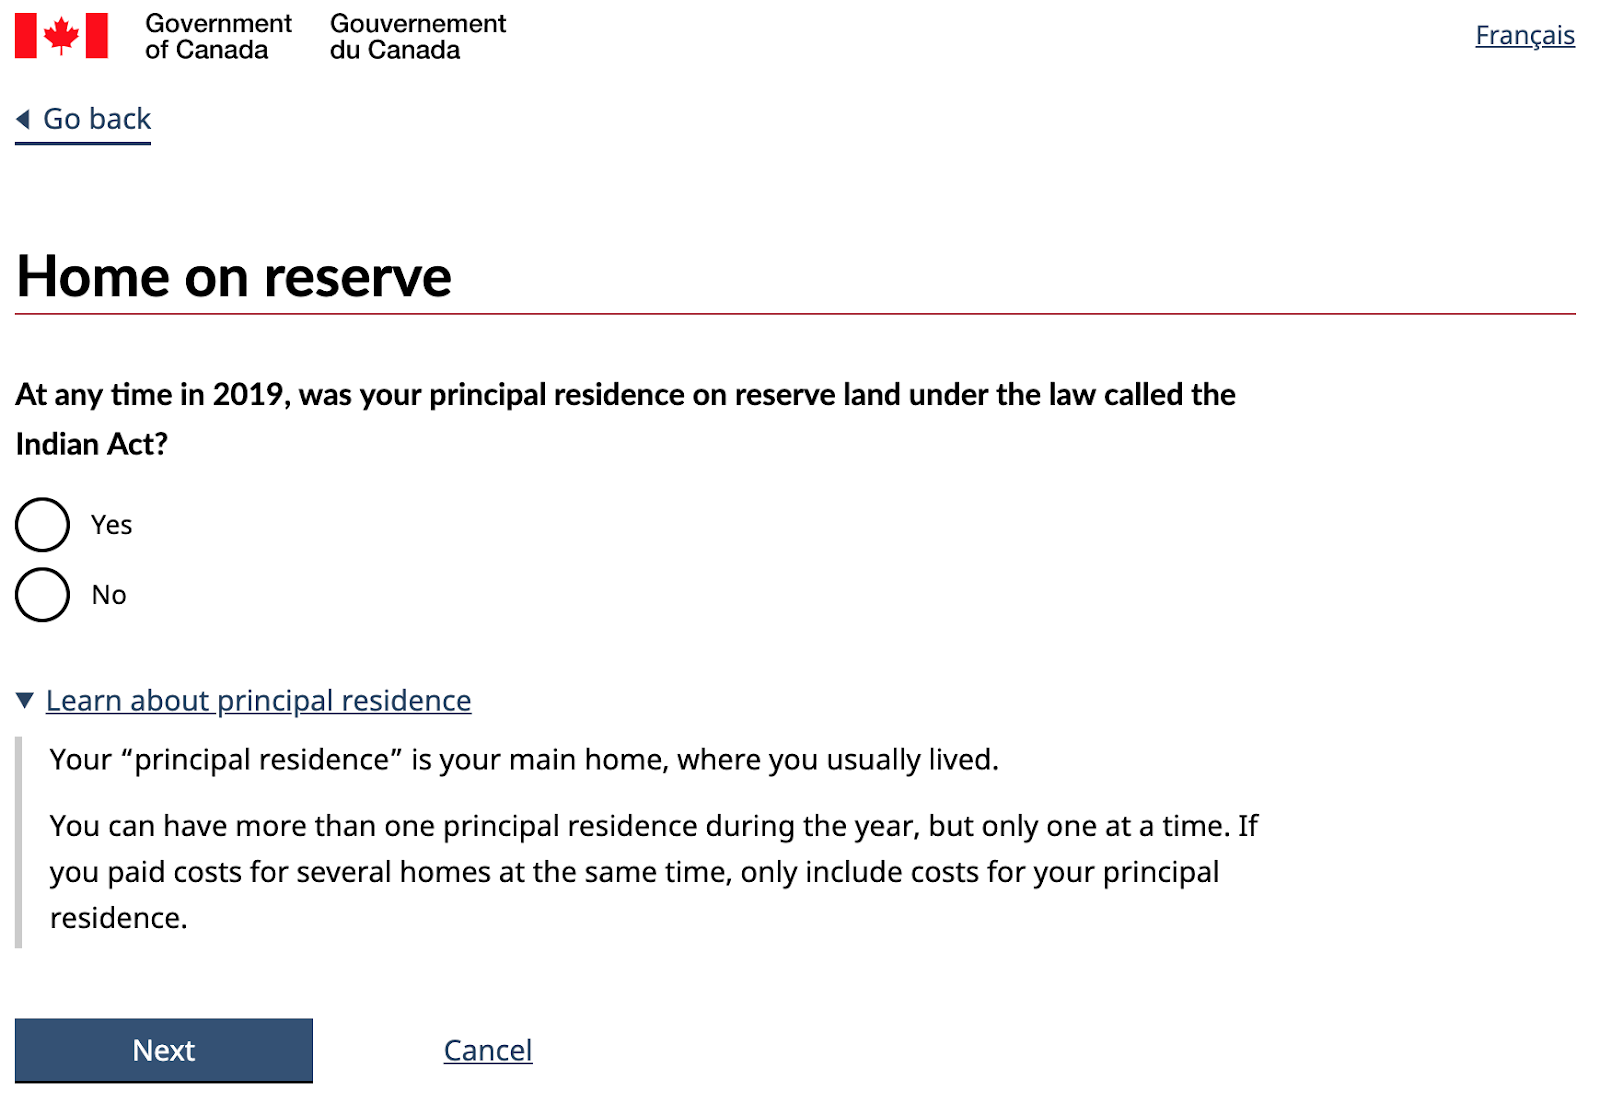 Screenshot of benefit question page titled "Home on reserve." Question "At any time in 2019, was your principal residence on reserve land under the law called the Indian Act?" Yes and No radio buttons. Link titled: Learn about principal residence. Description: Your principal residence is your main home, where you usually lived. You can have more than one principal residence during the year, but only one at a time. If you paid costs for several homes at the same time, only include costs for your principal residence." Next and cancel buttons.